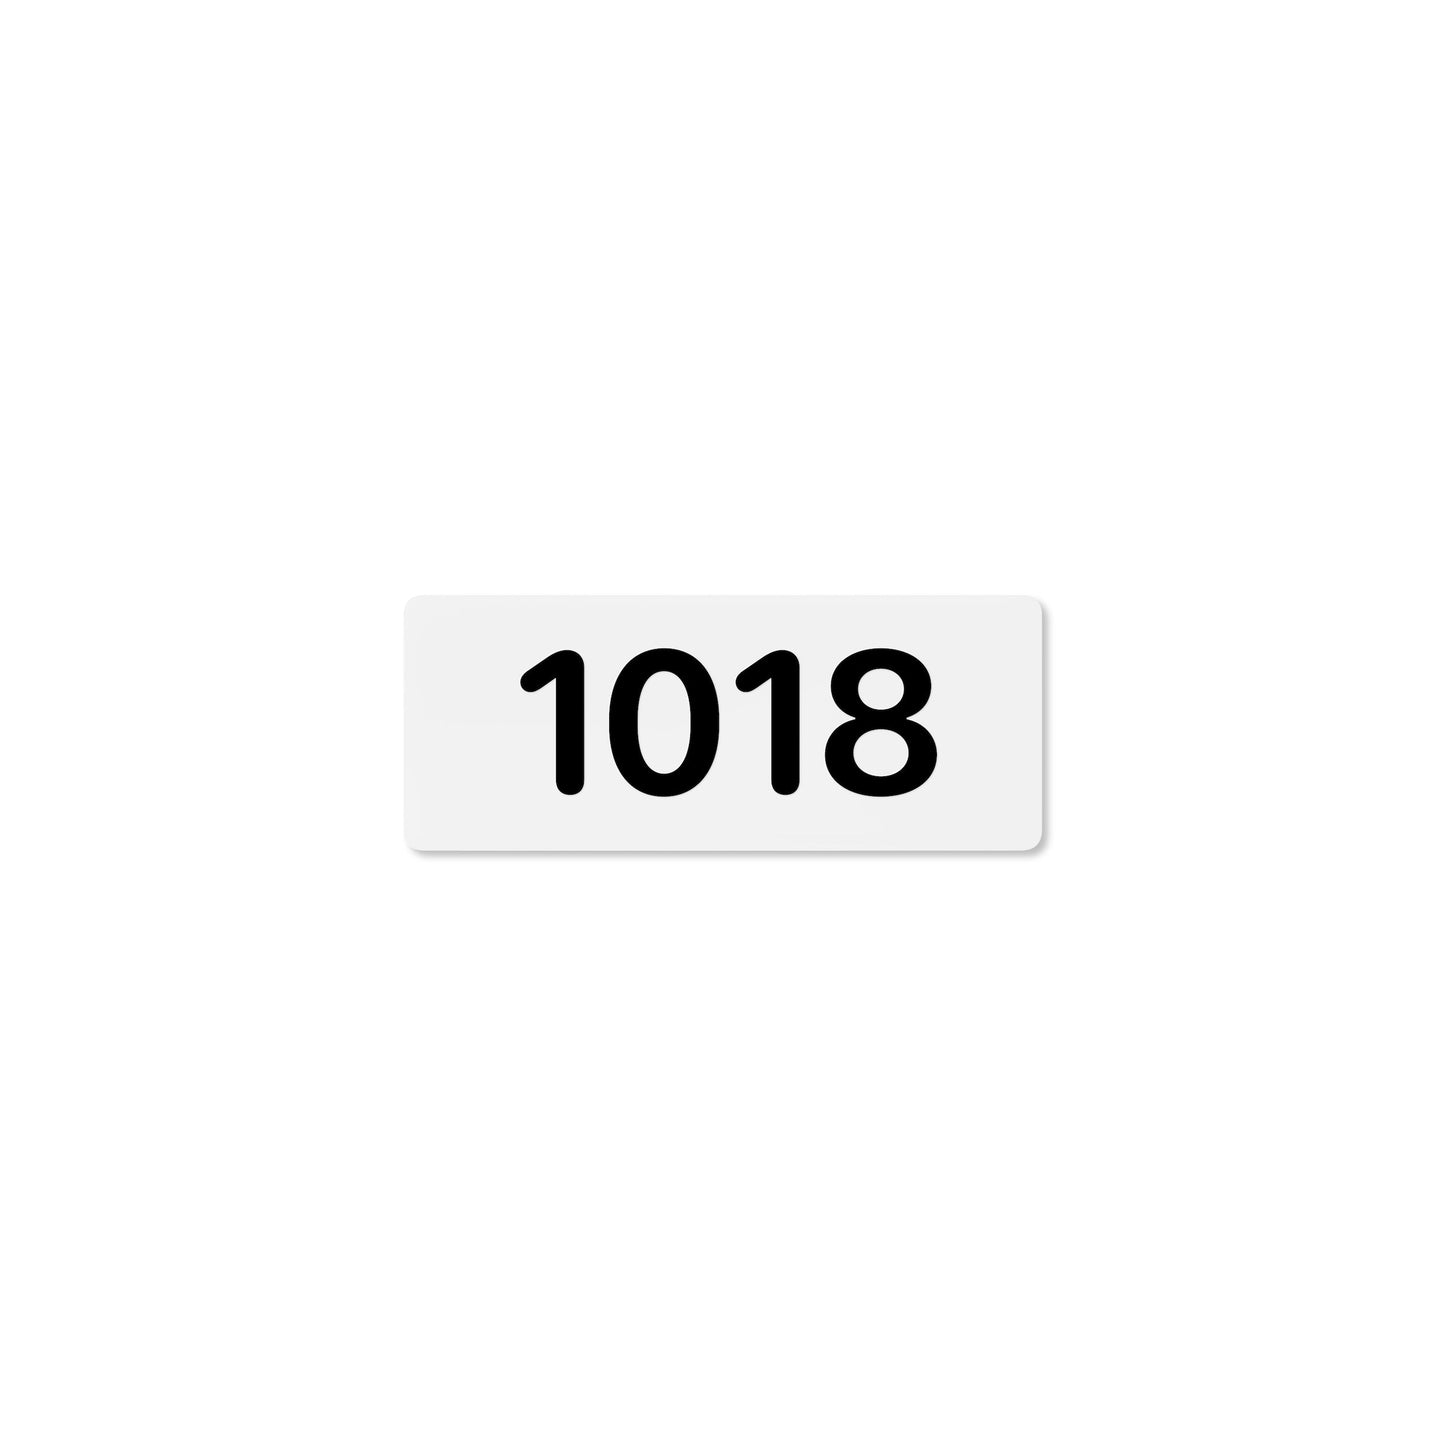 Numeral 1018